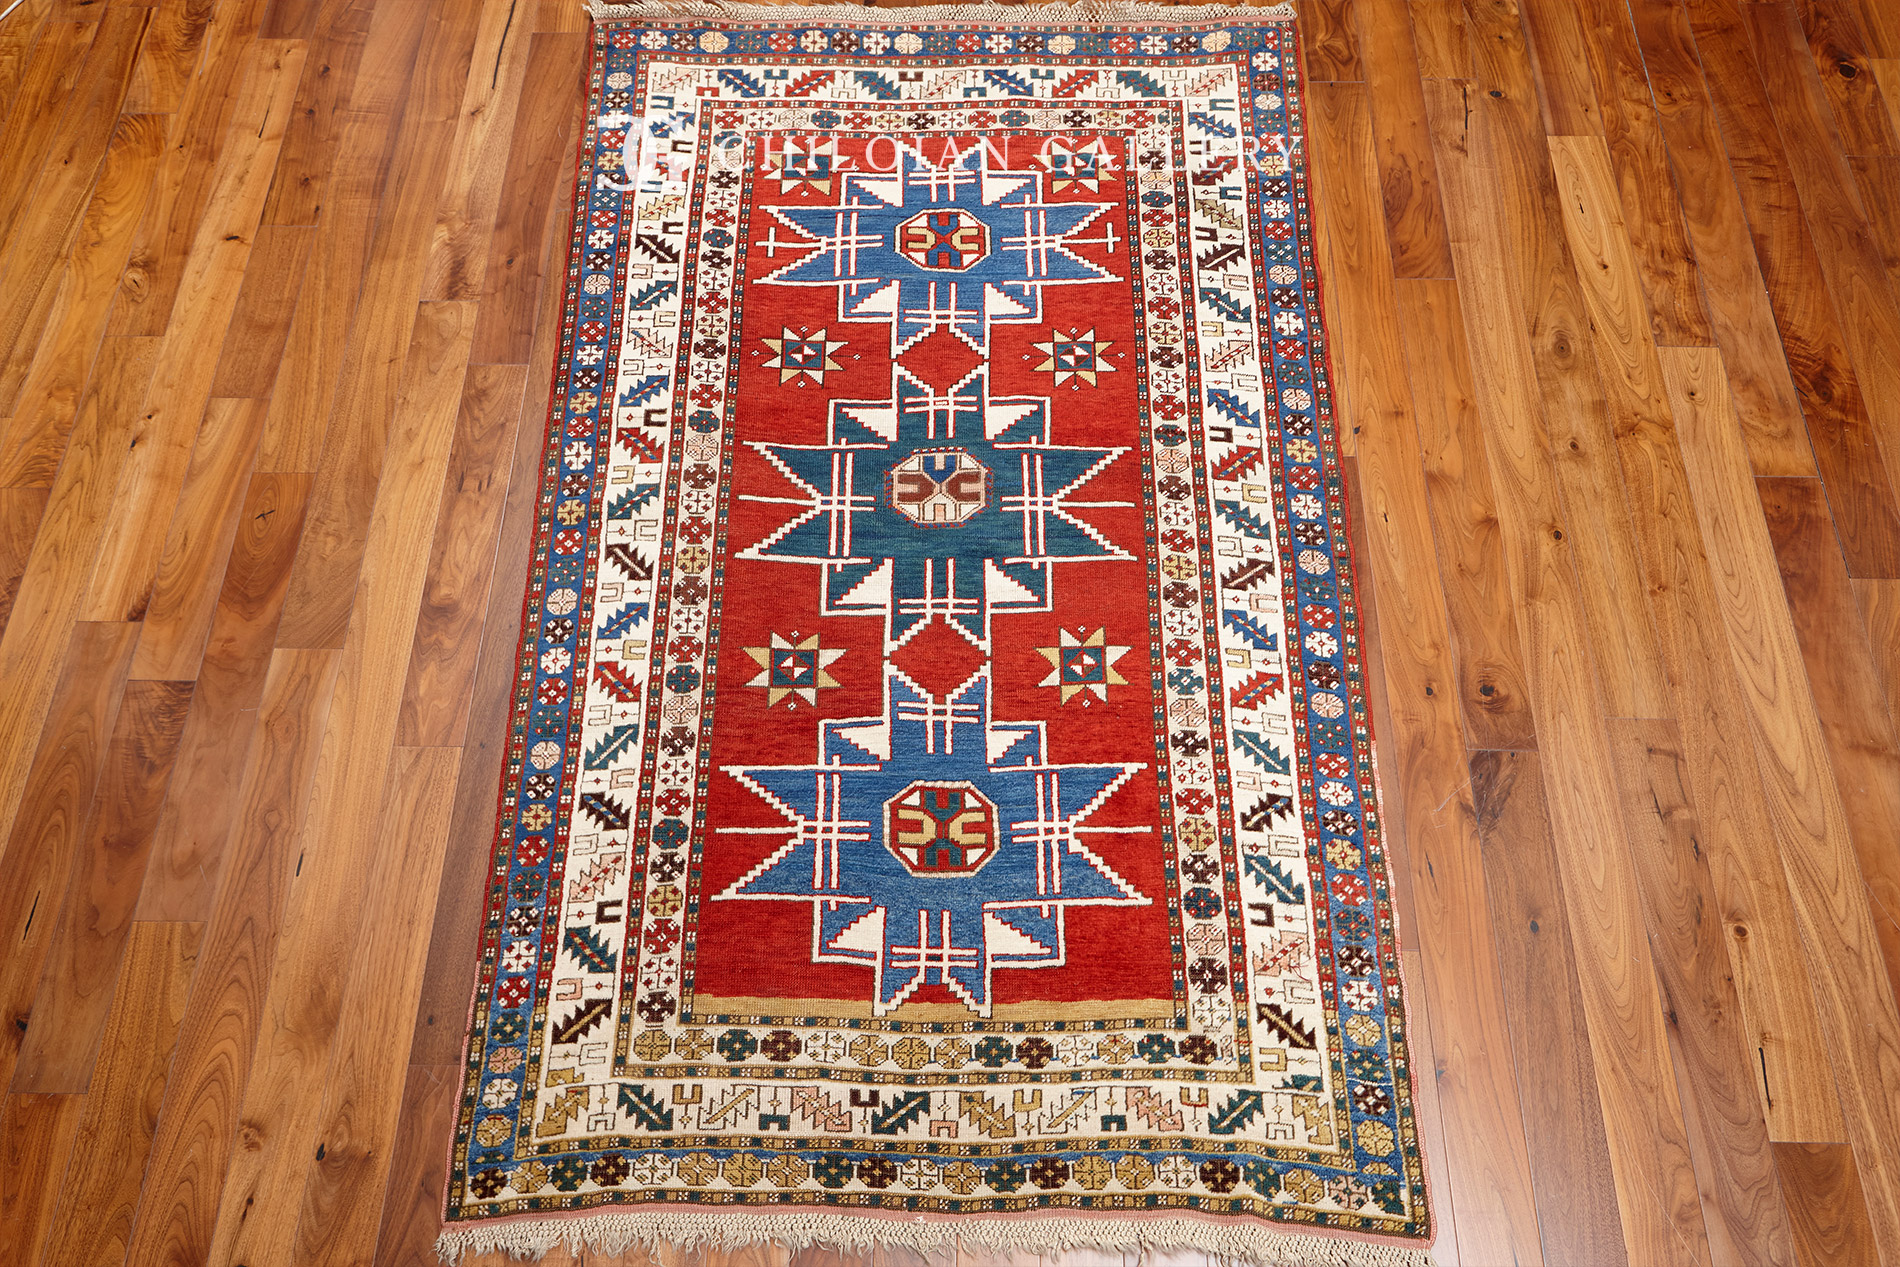 Shirvan Lezghi Rug Chiloian Gallery Antique Rugs And Carpets